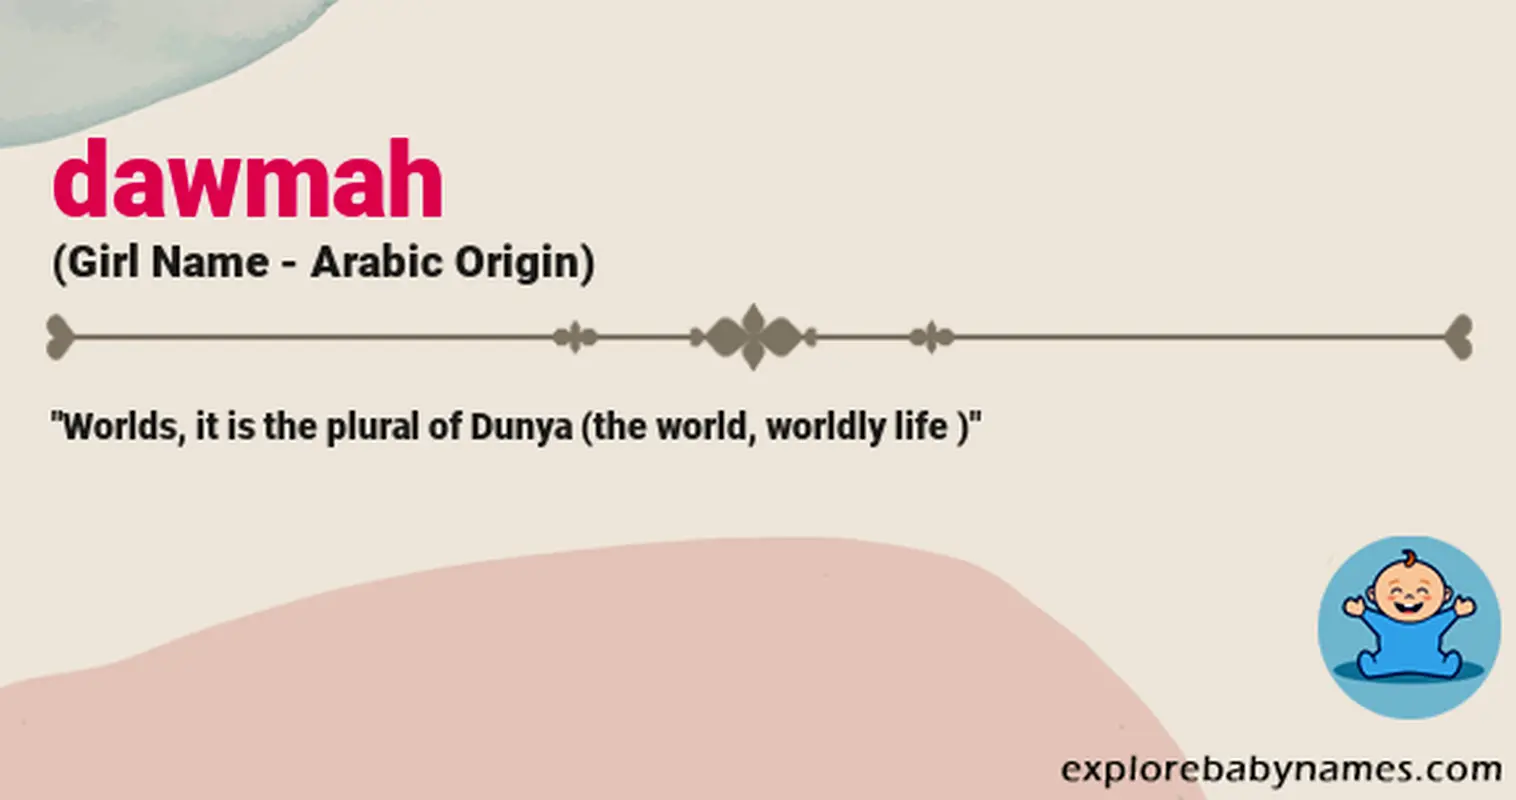 Meaning of Dawmah